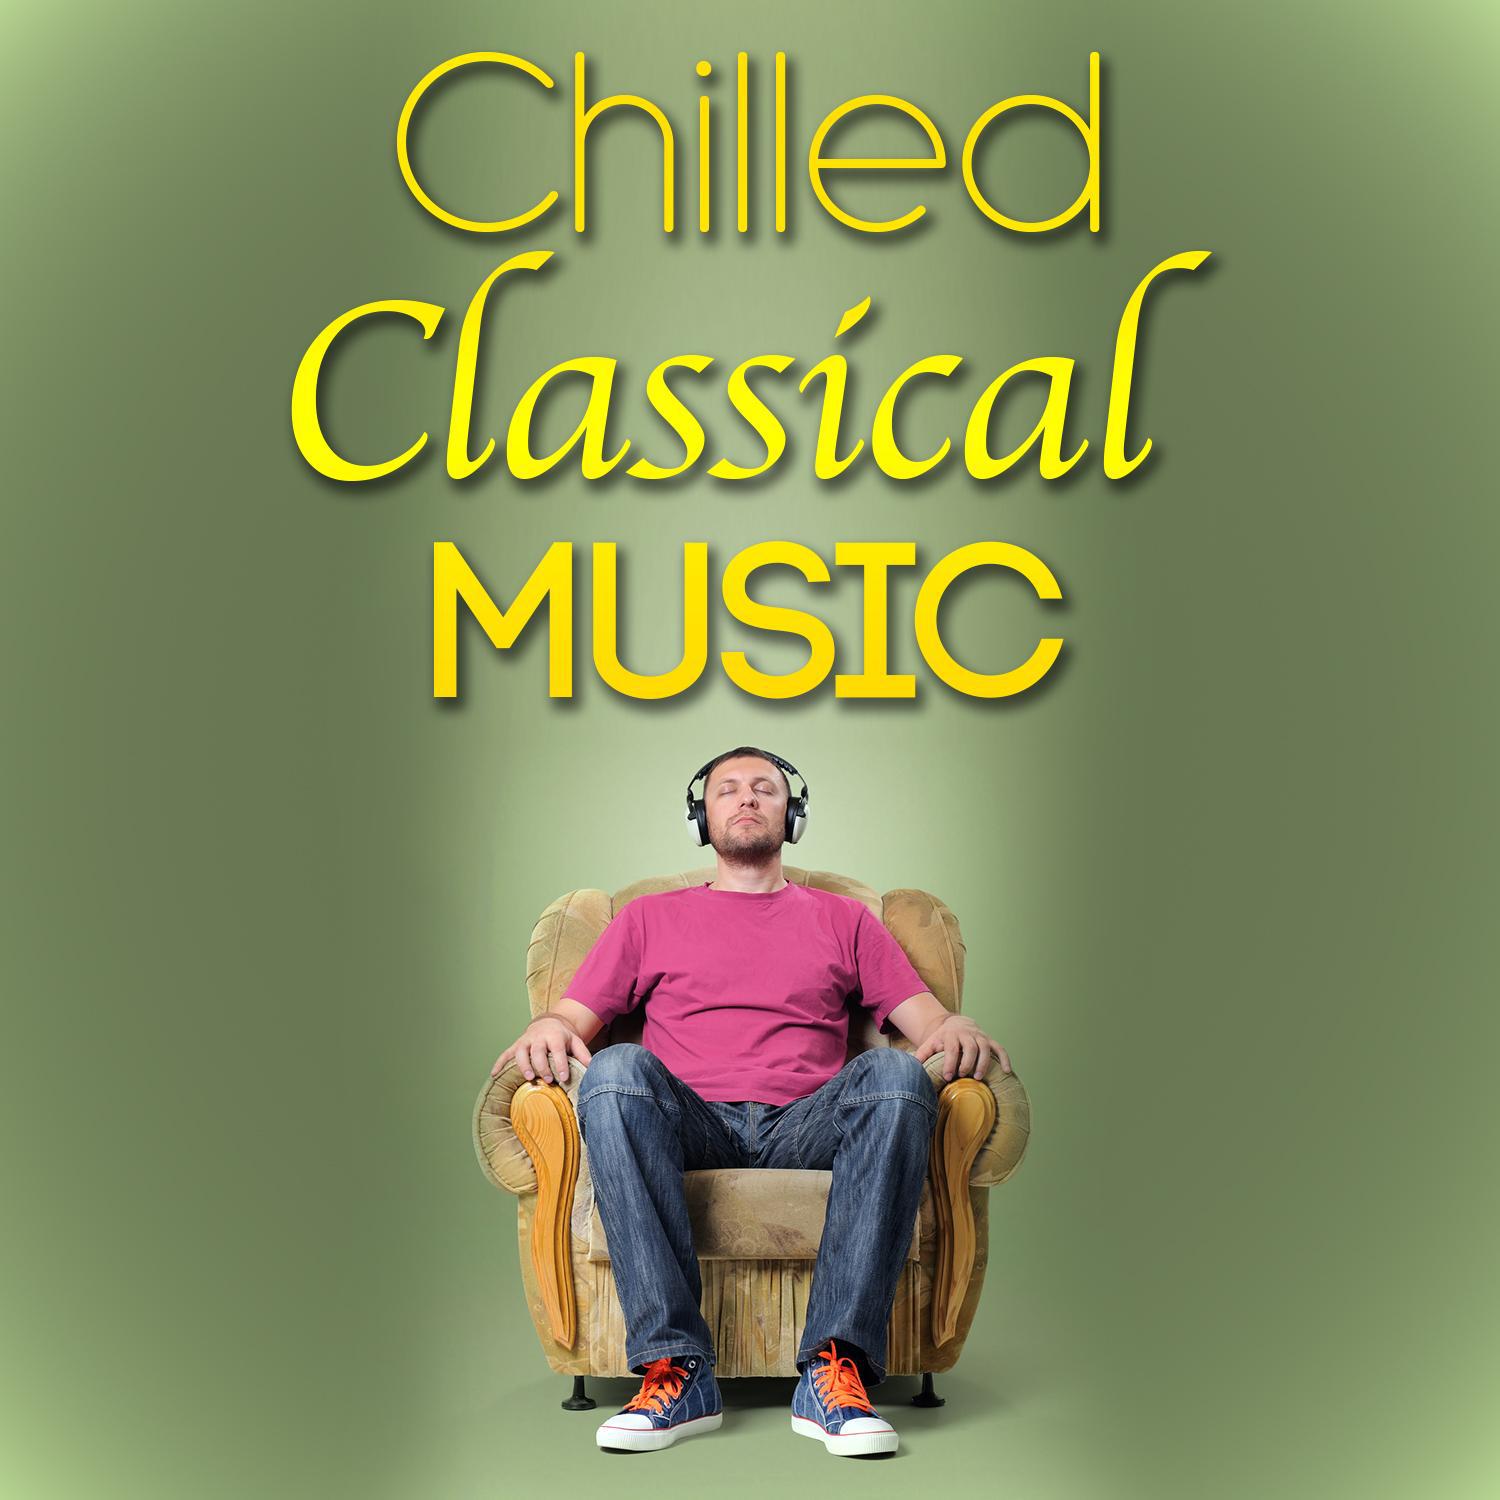 Chilled Classical Music